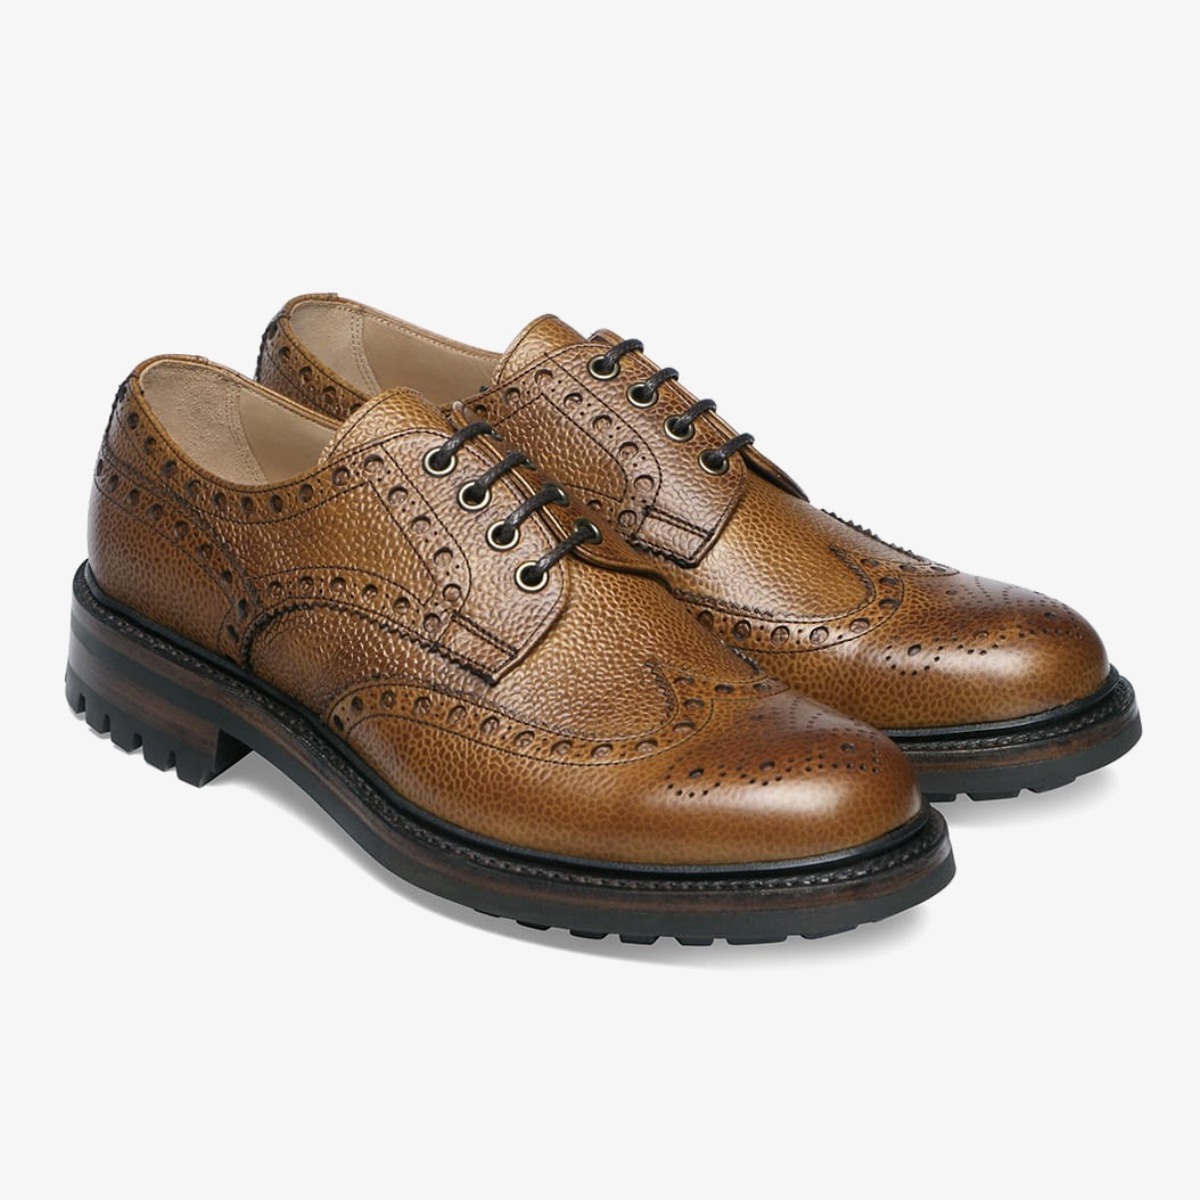 Cheaney Avon almond brogue derby shoes